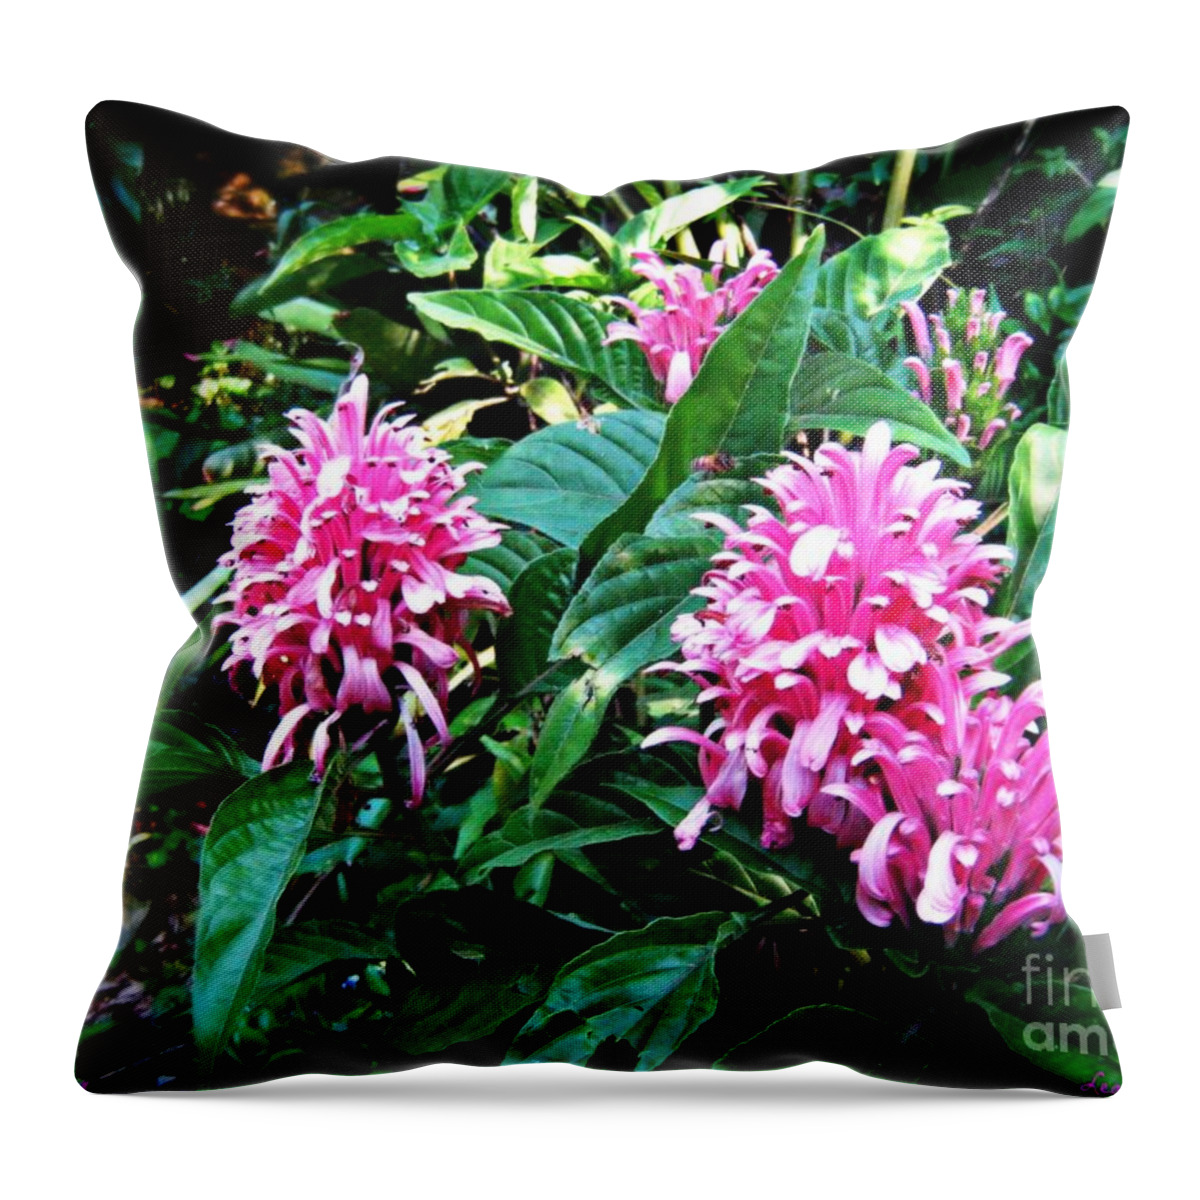 Flowers Throw Pillow featuring the photograph Island Flower by Leanne Seymour